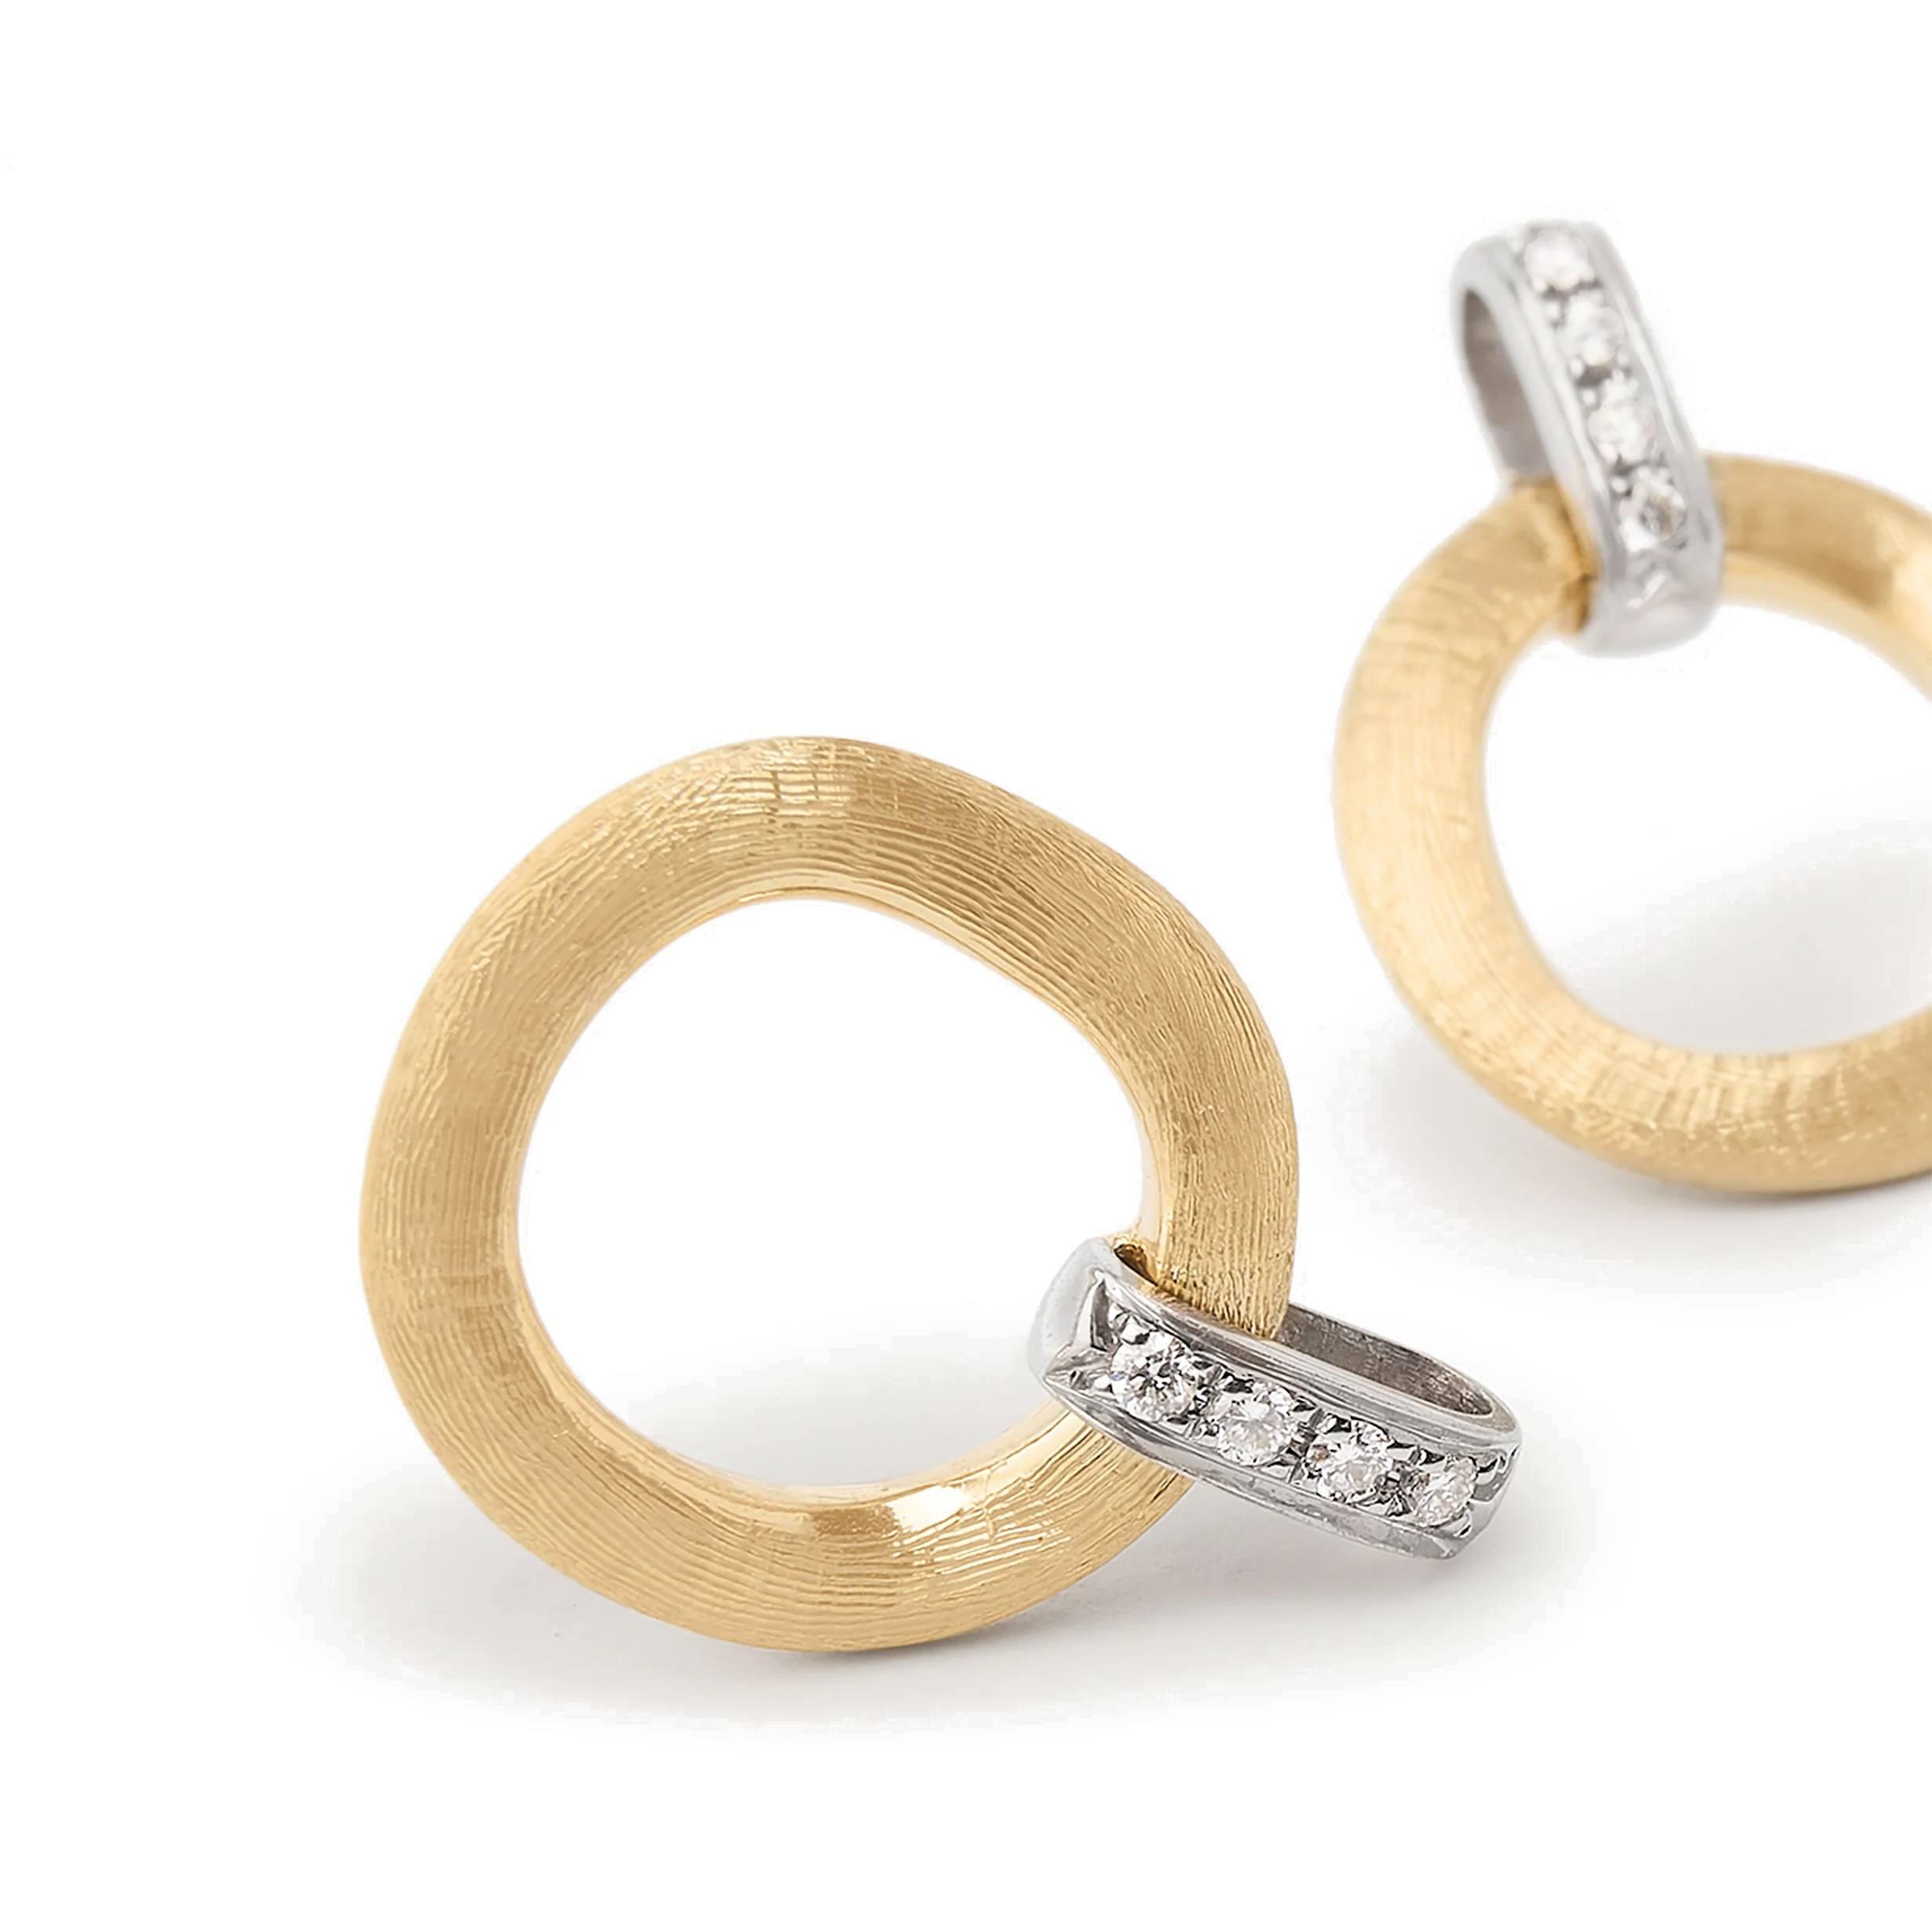 Marco Bicego Jaipur Gold Stud Drop Earrings with Diamonds 3